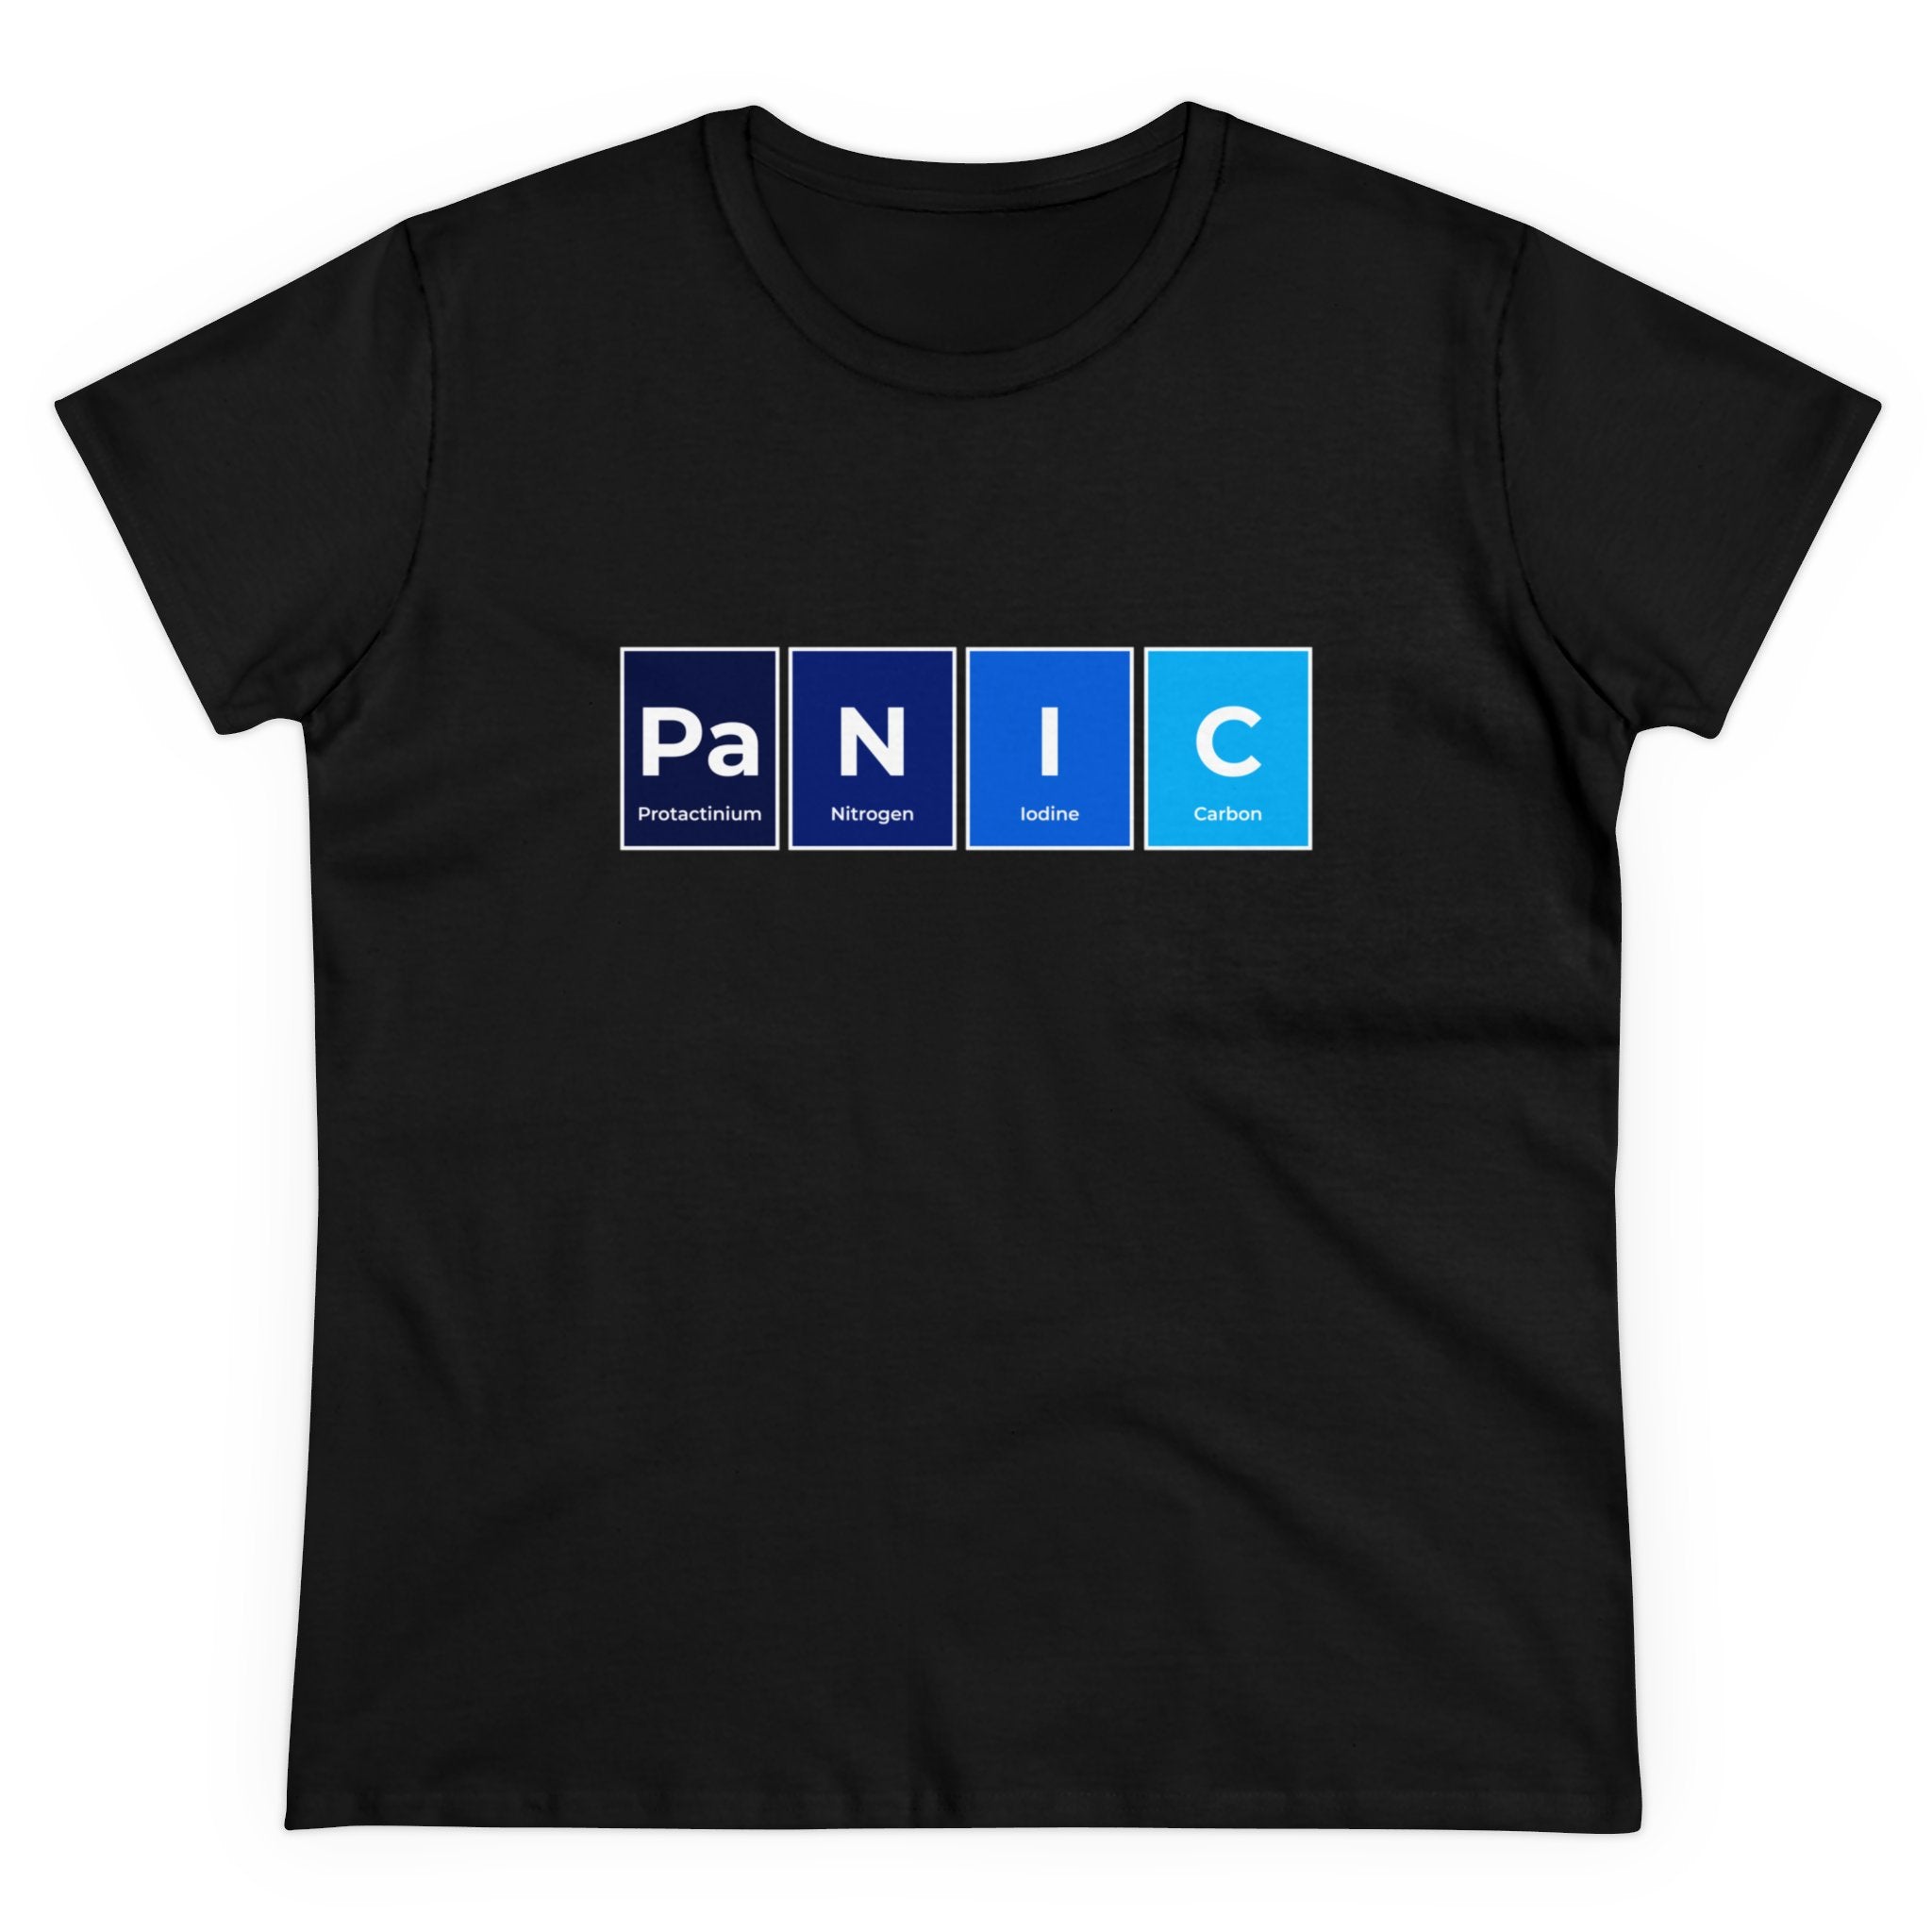 A black Pa-N-I-C - Women's Tee displays the word "PANIC," with each letter represented by an element from the periodic table: Protactinium, Nitrogen, Iodine, Carbon. Stay comfy while sporting trendy designs that make a statement.